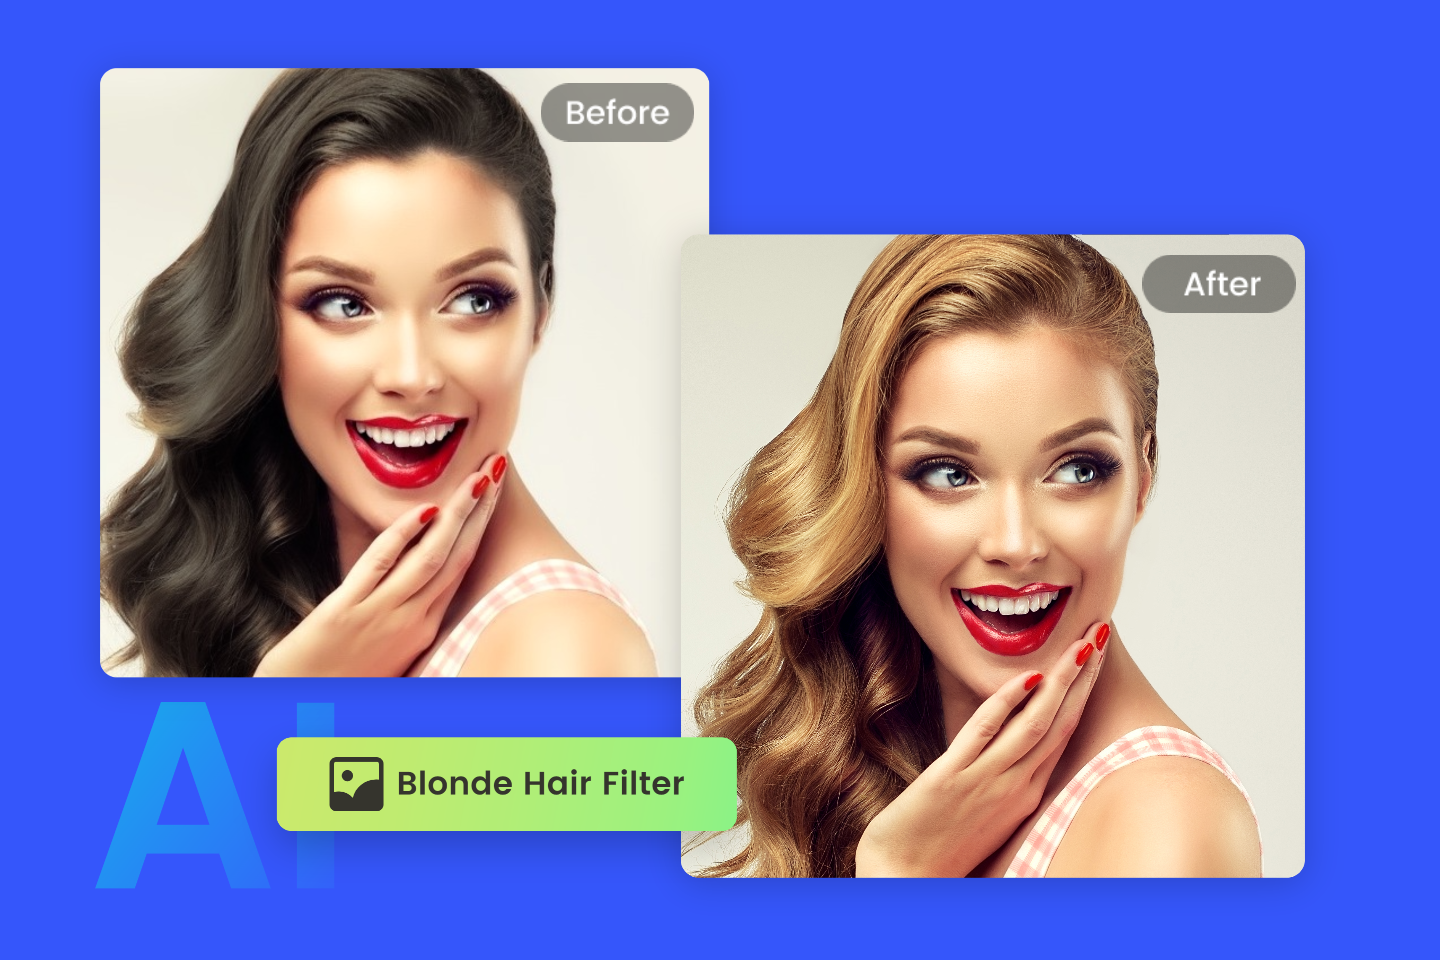 Blonde Hair Filter: Virtual Hair Color Try on for Blonde Hair